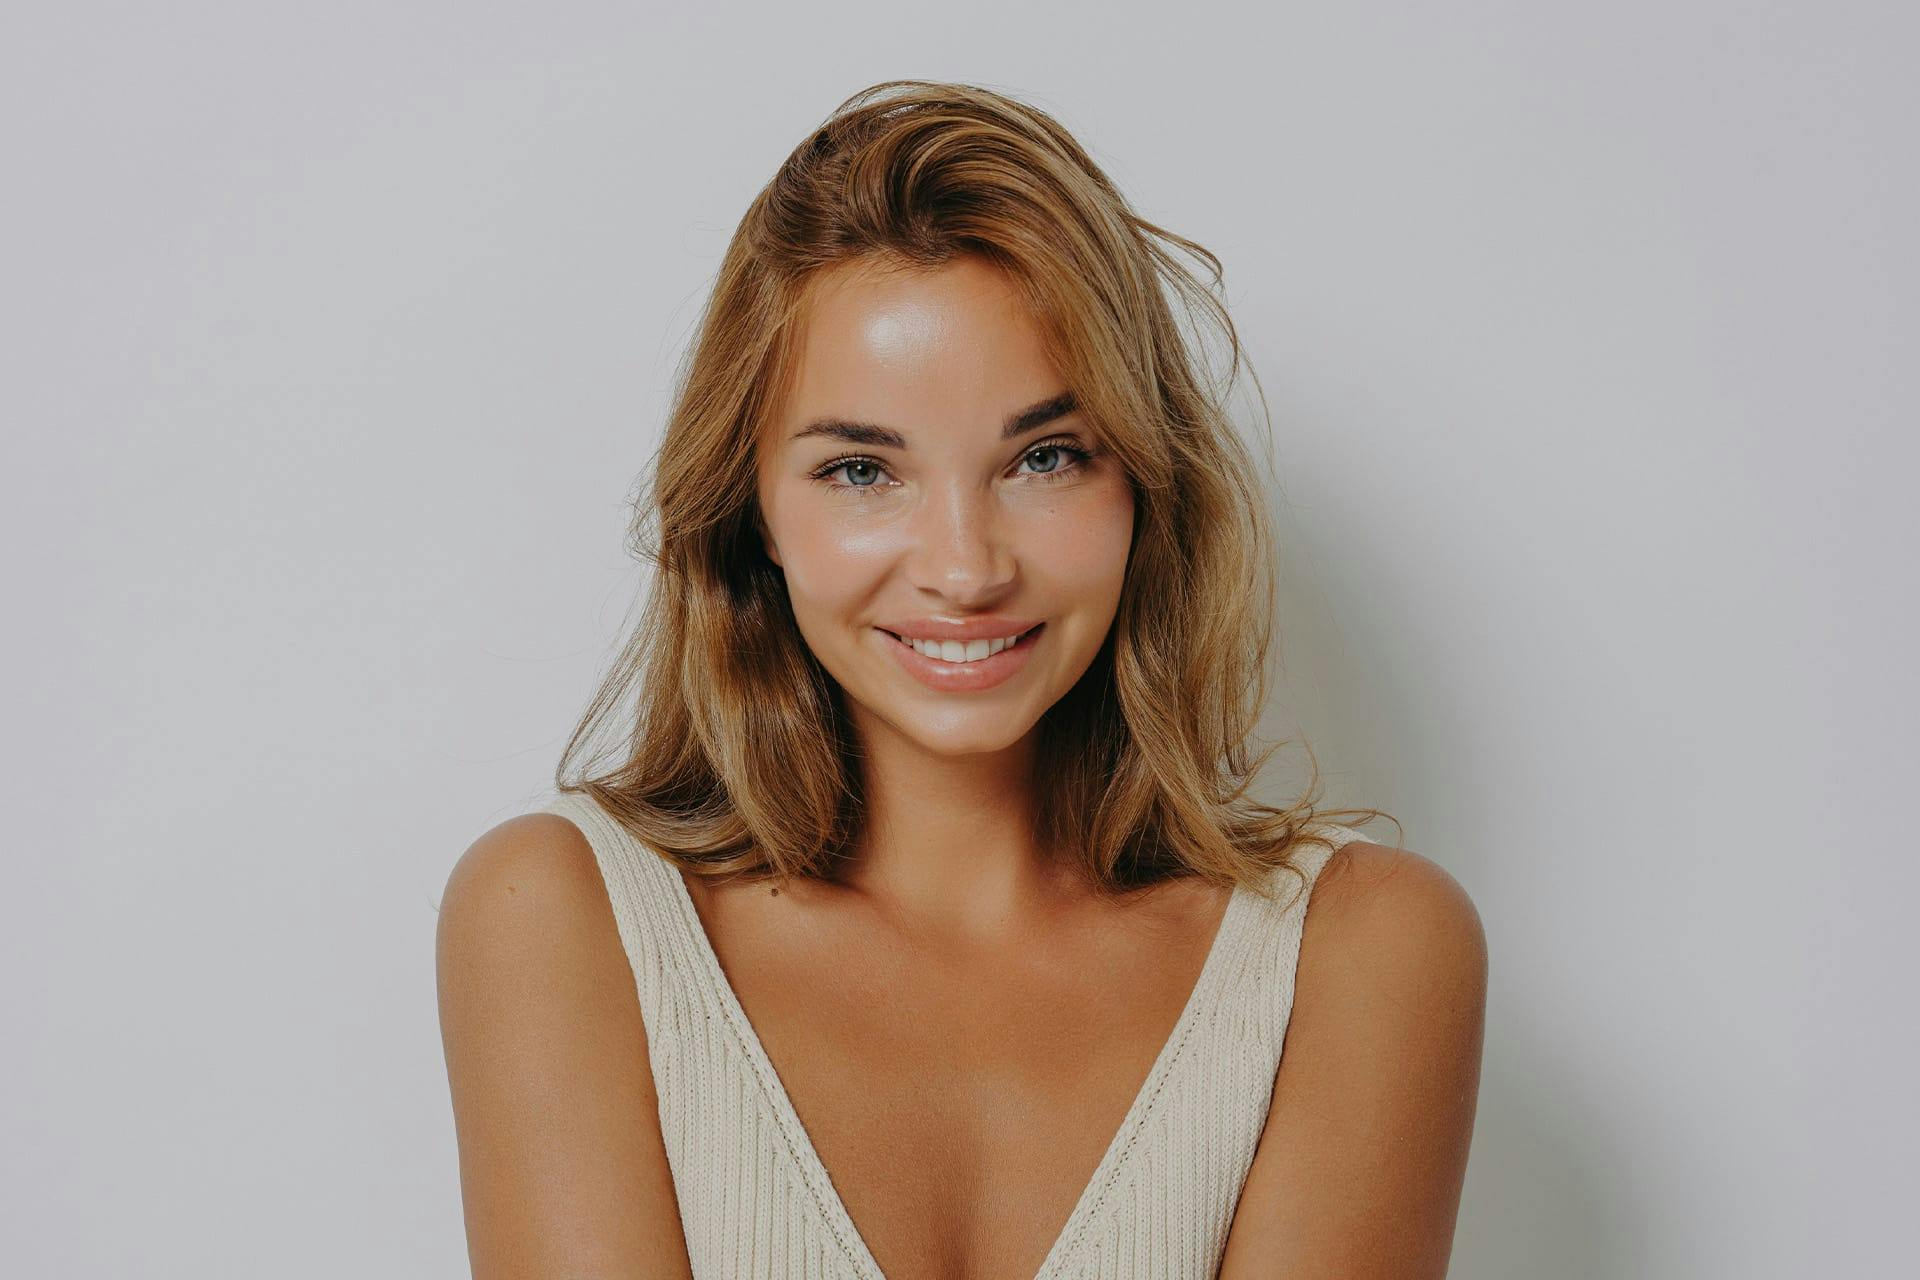 Young woman in white dress smiling at camera